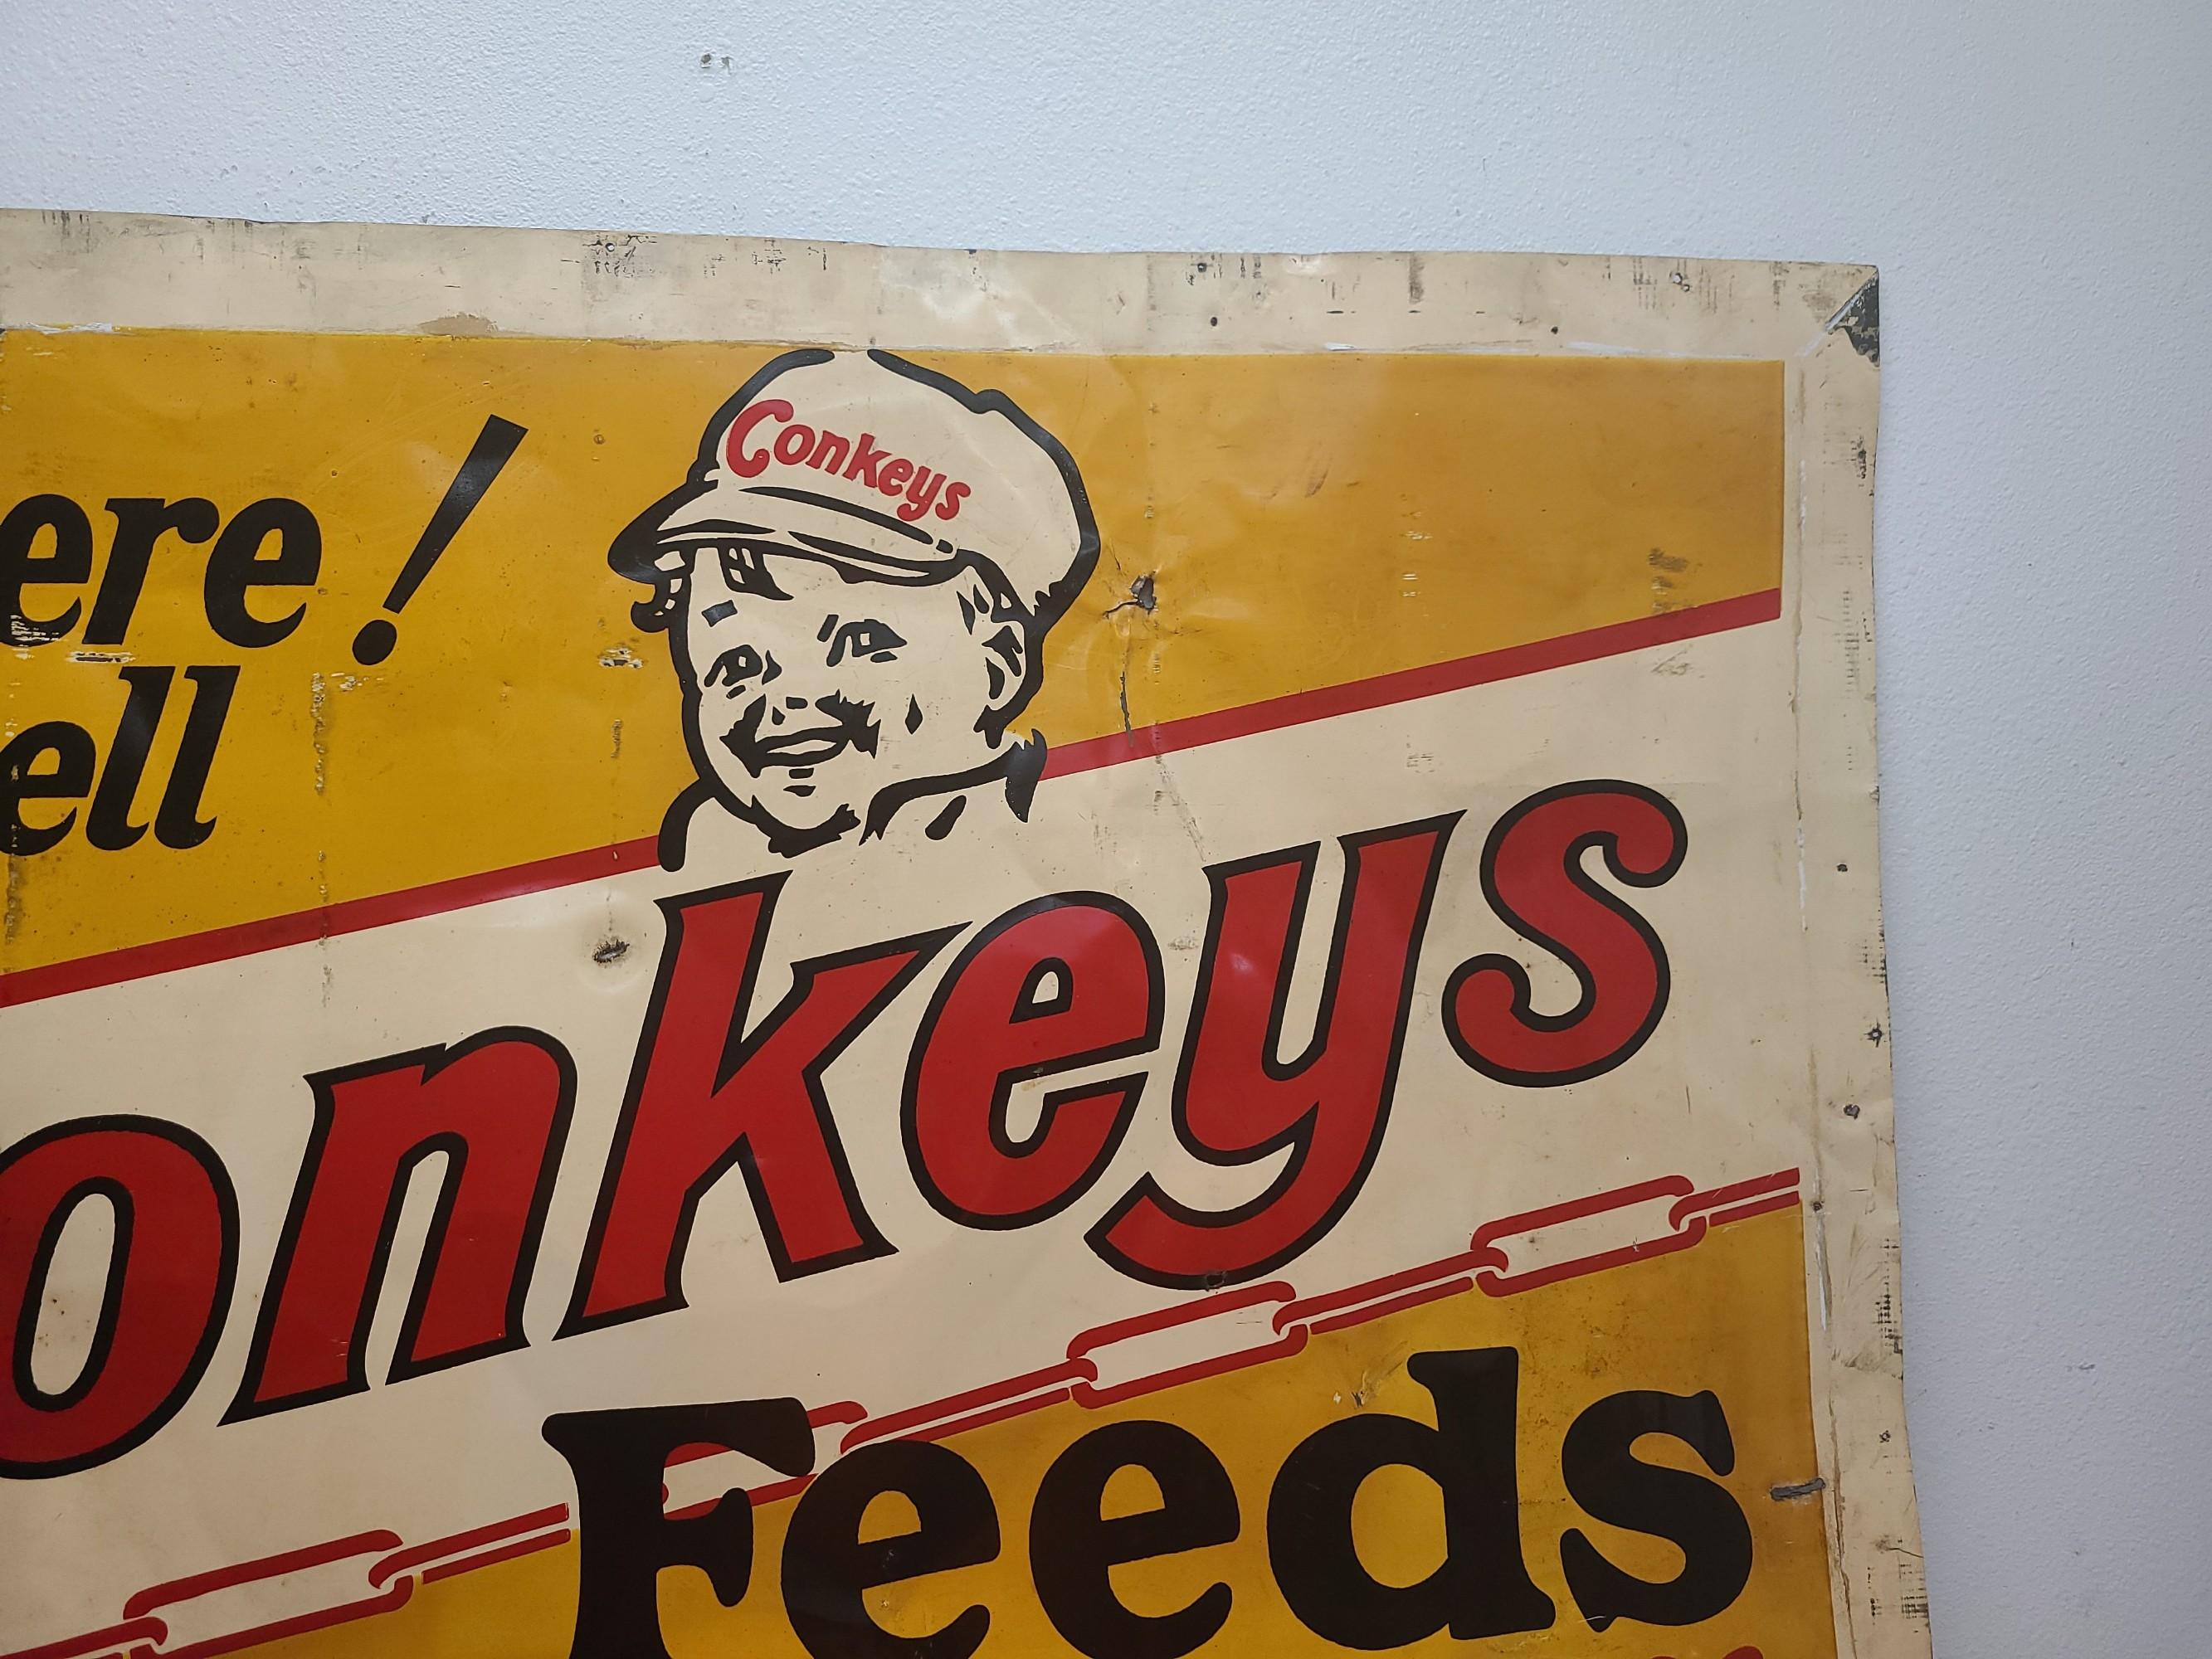 Coukey's  Feed's Sign